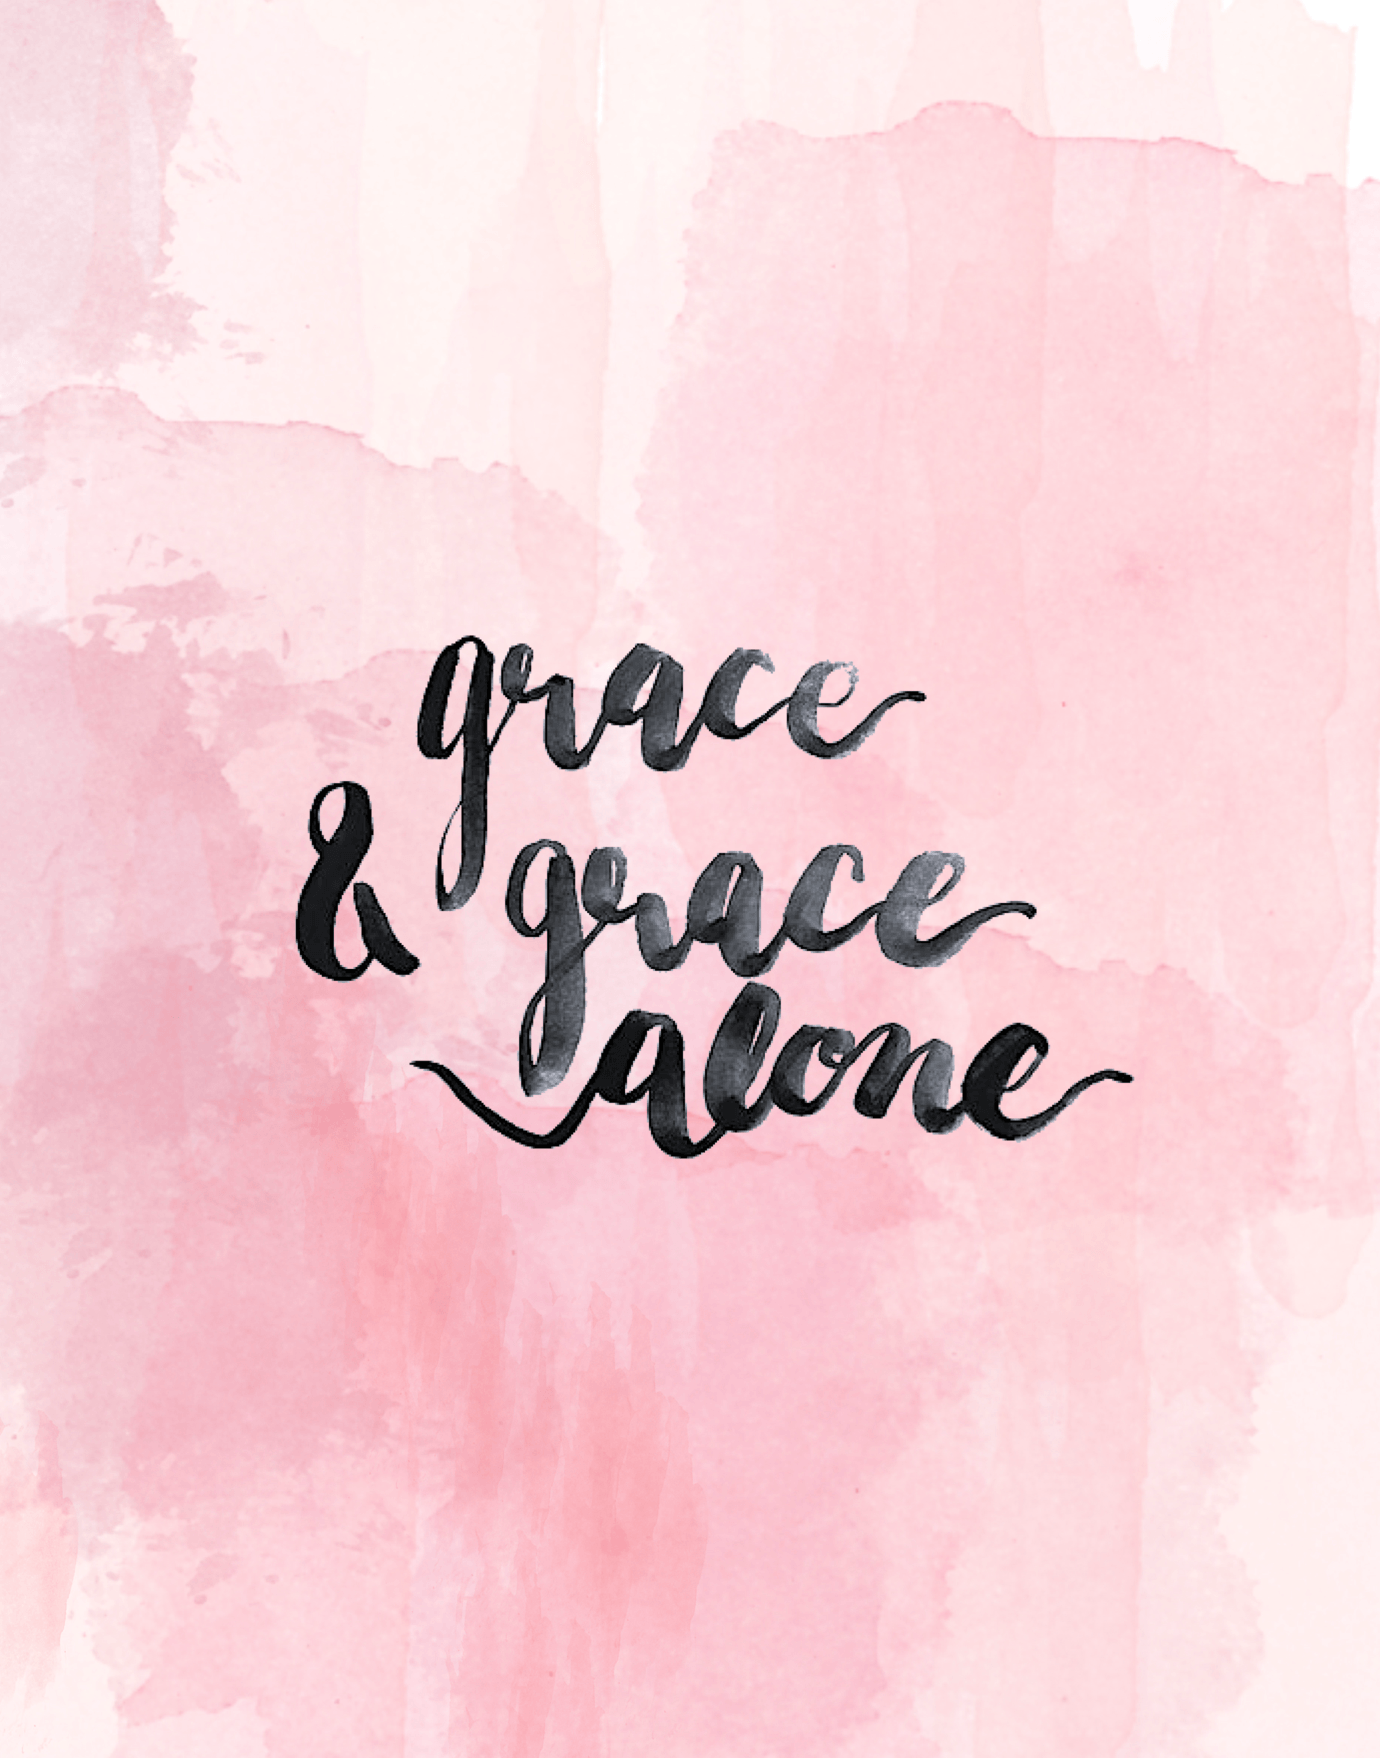 What Does Your Wallpaper Say? Shane. Bible verse wallpaper, Grace alone, Wallpaper bible